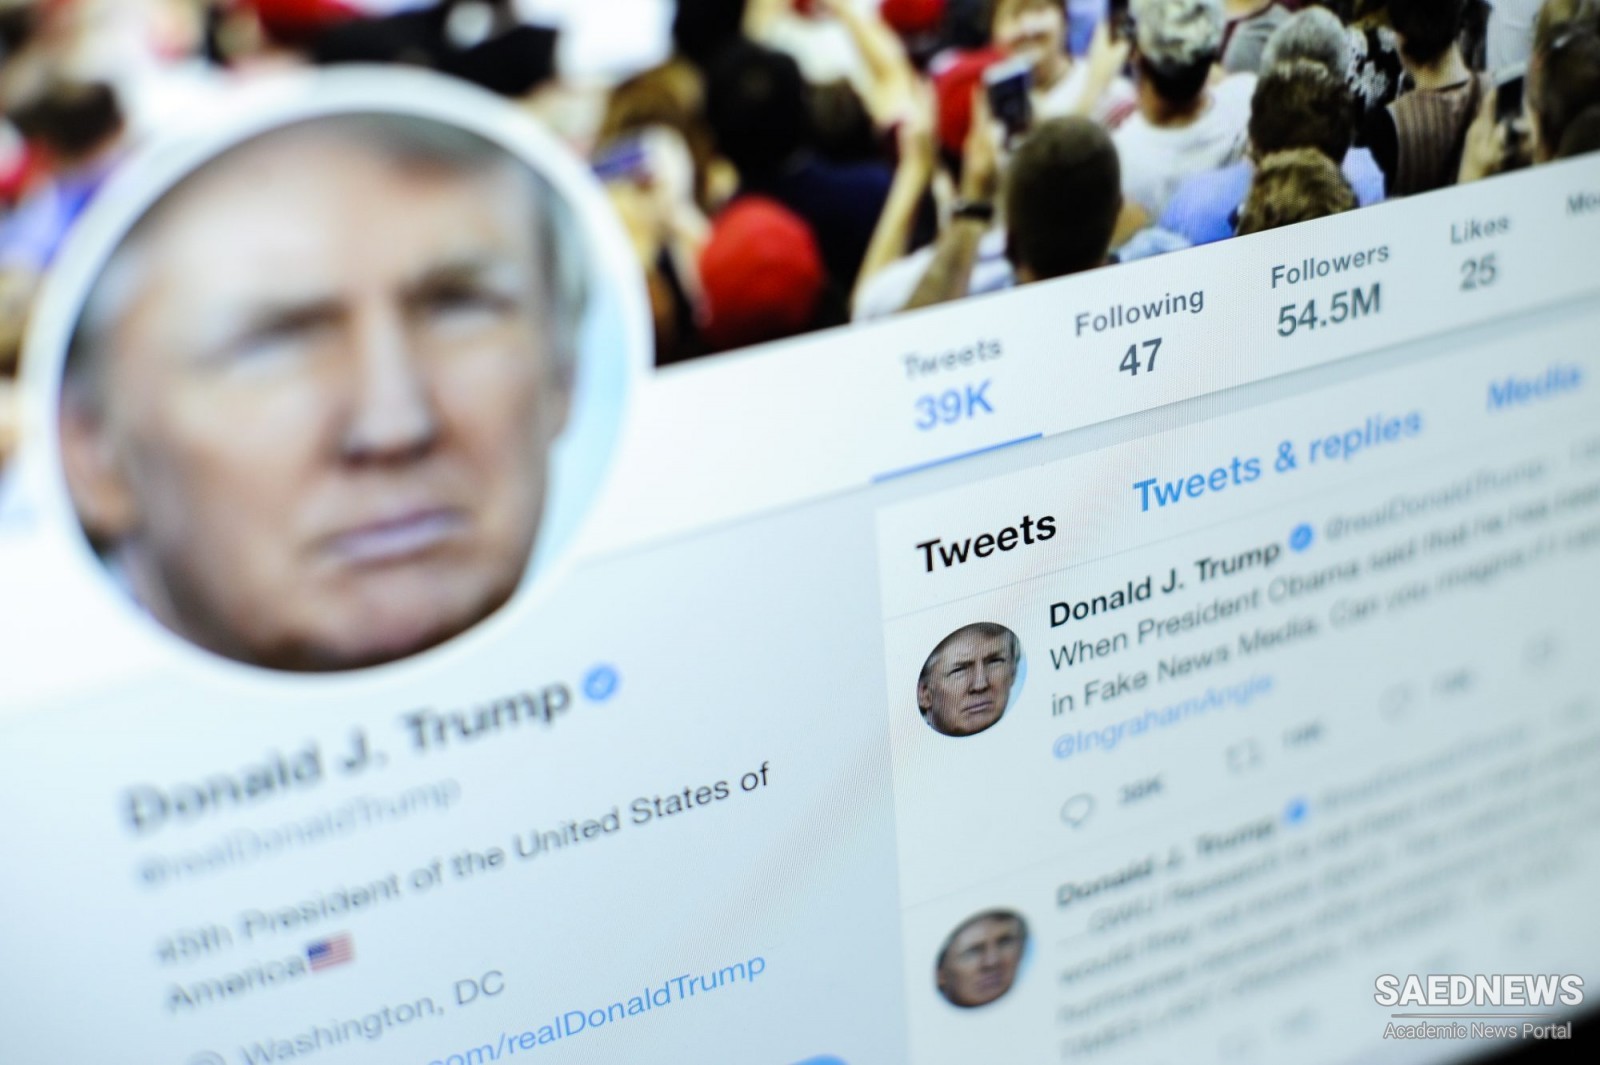 Donald Trump Boycotted by the Social Media: @POTUS Suspended